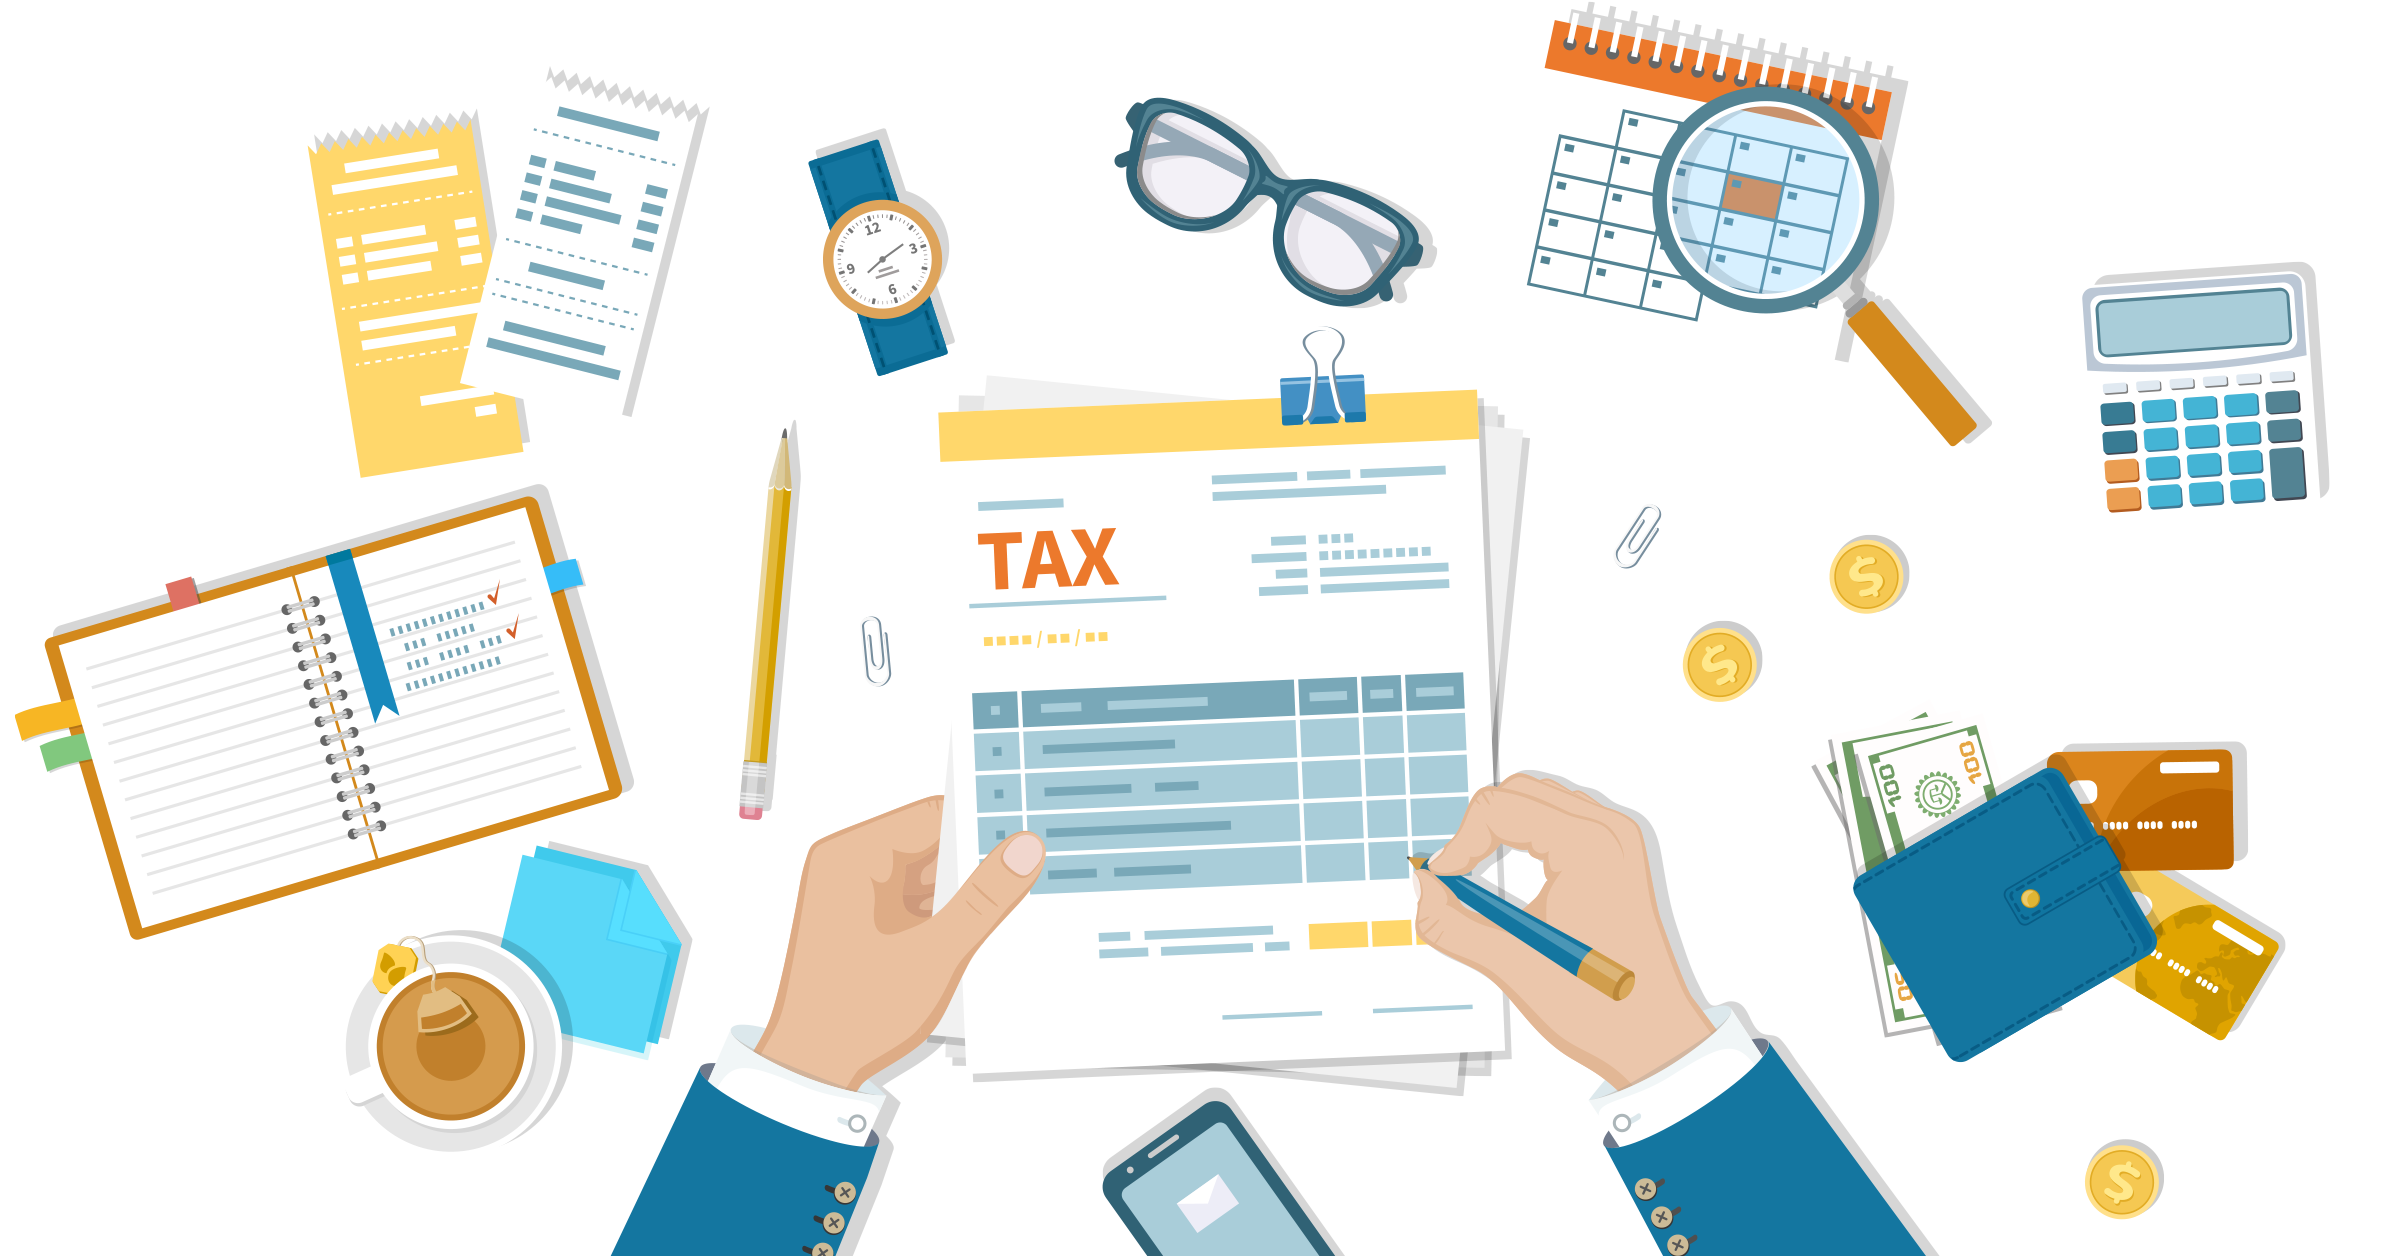 Account for Taxes on Business Expenses